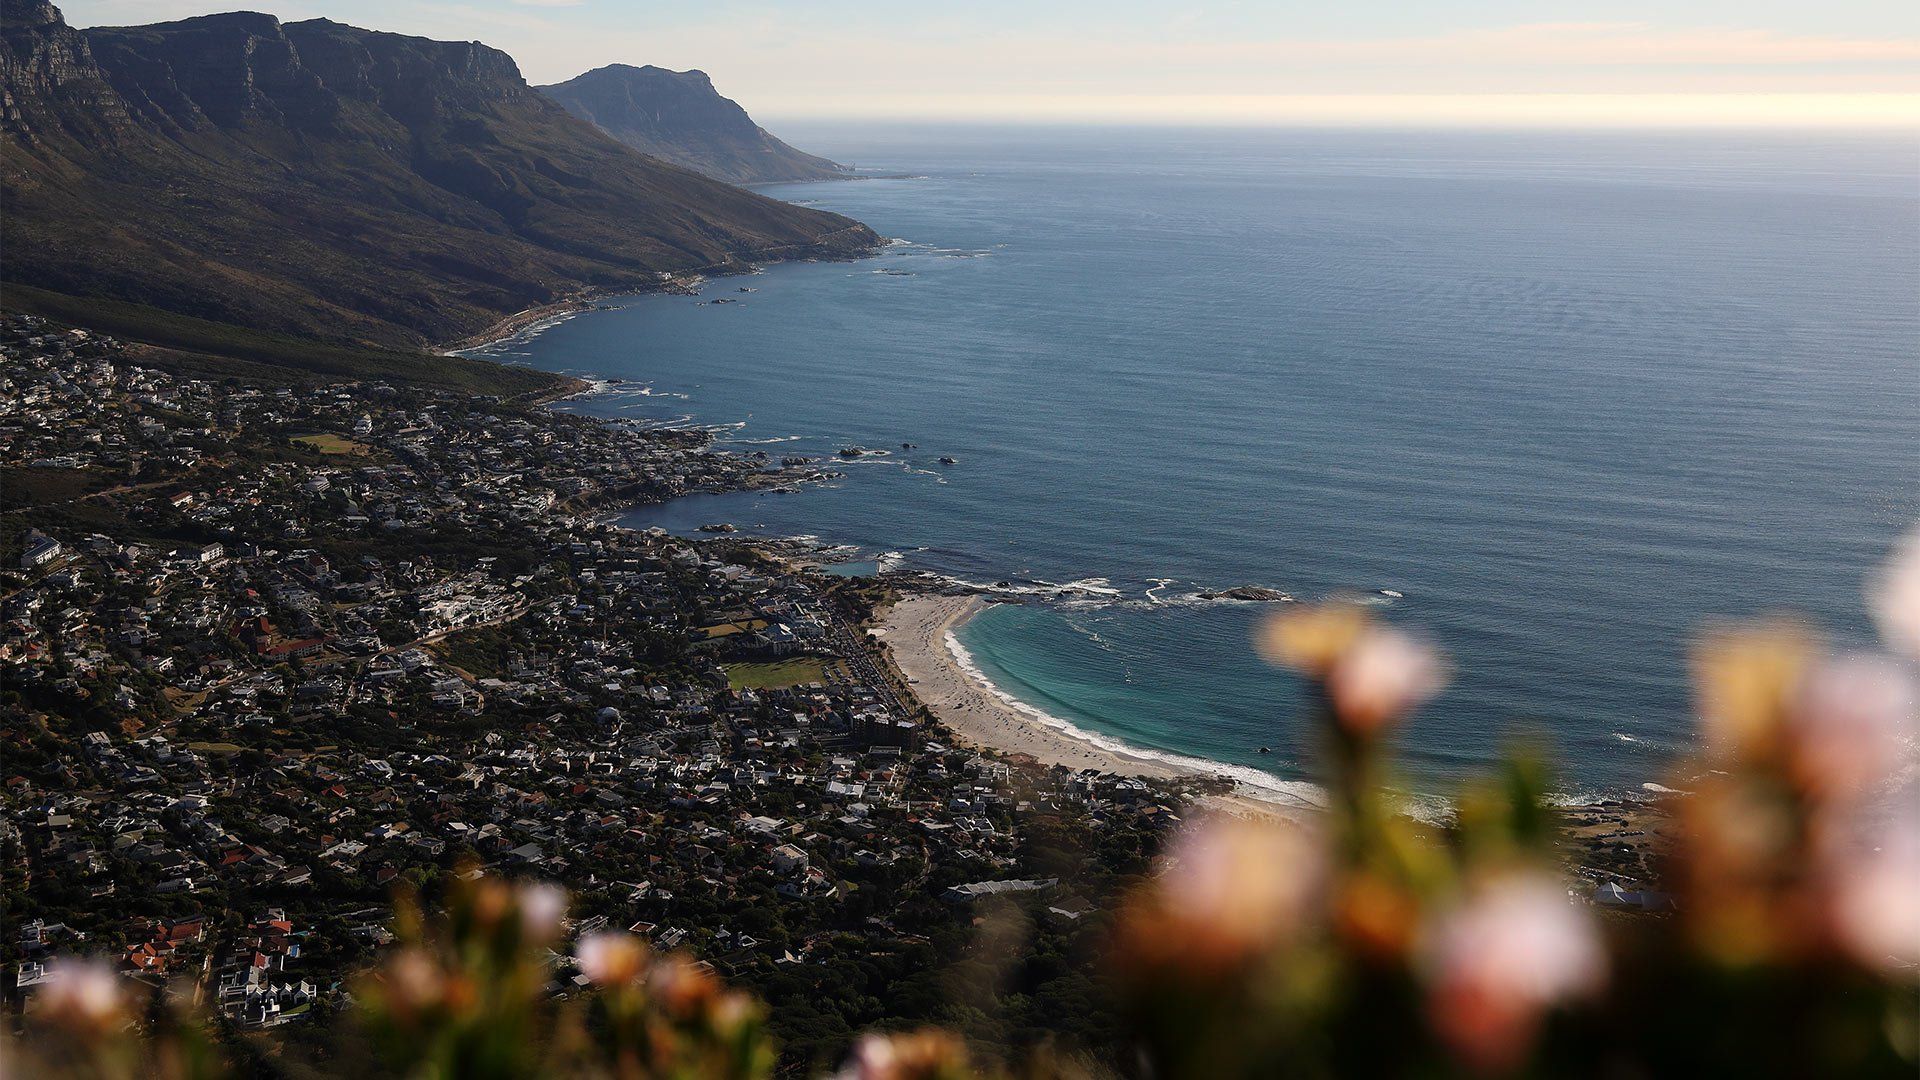 A coastal village in South Africa viewed from a high vantage point, with hills in the distance and the sea stretching to the horizon.